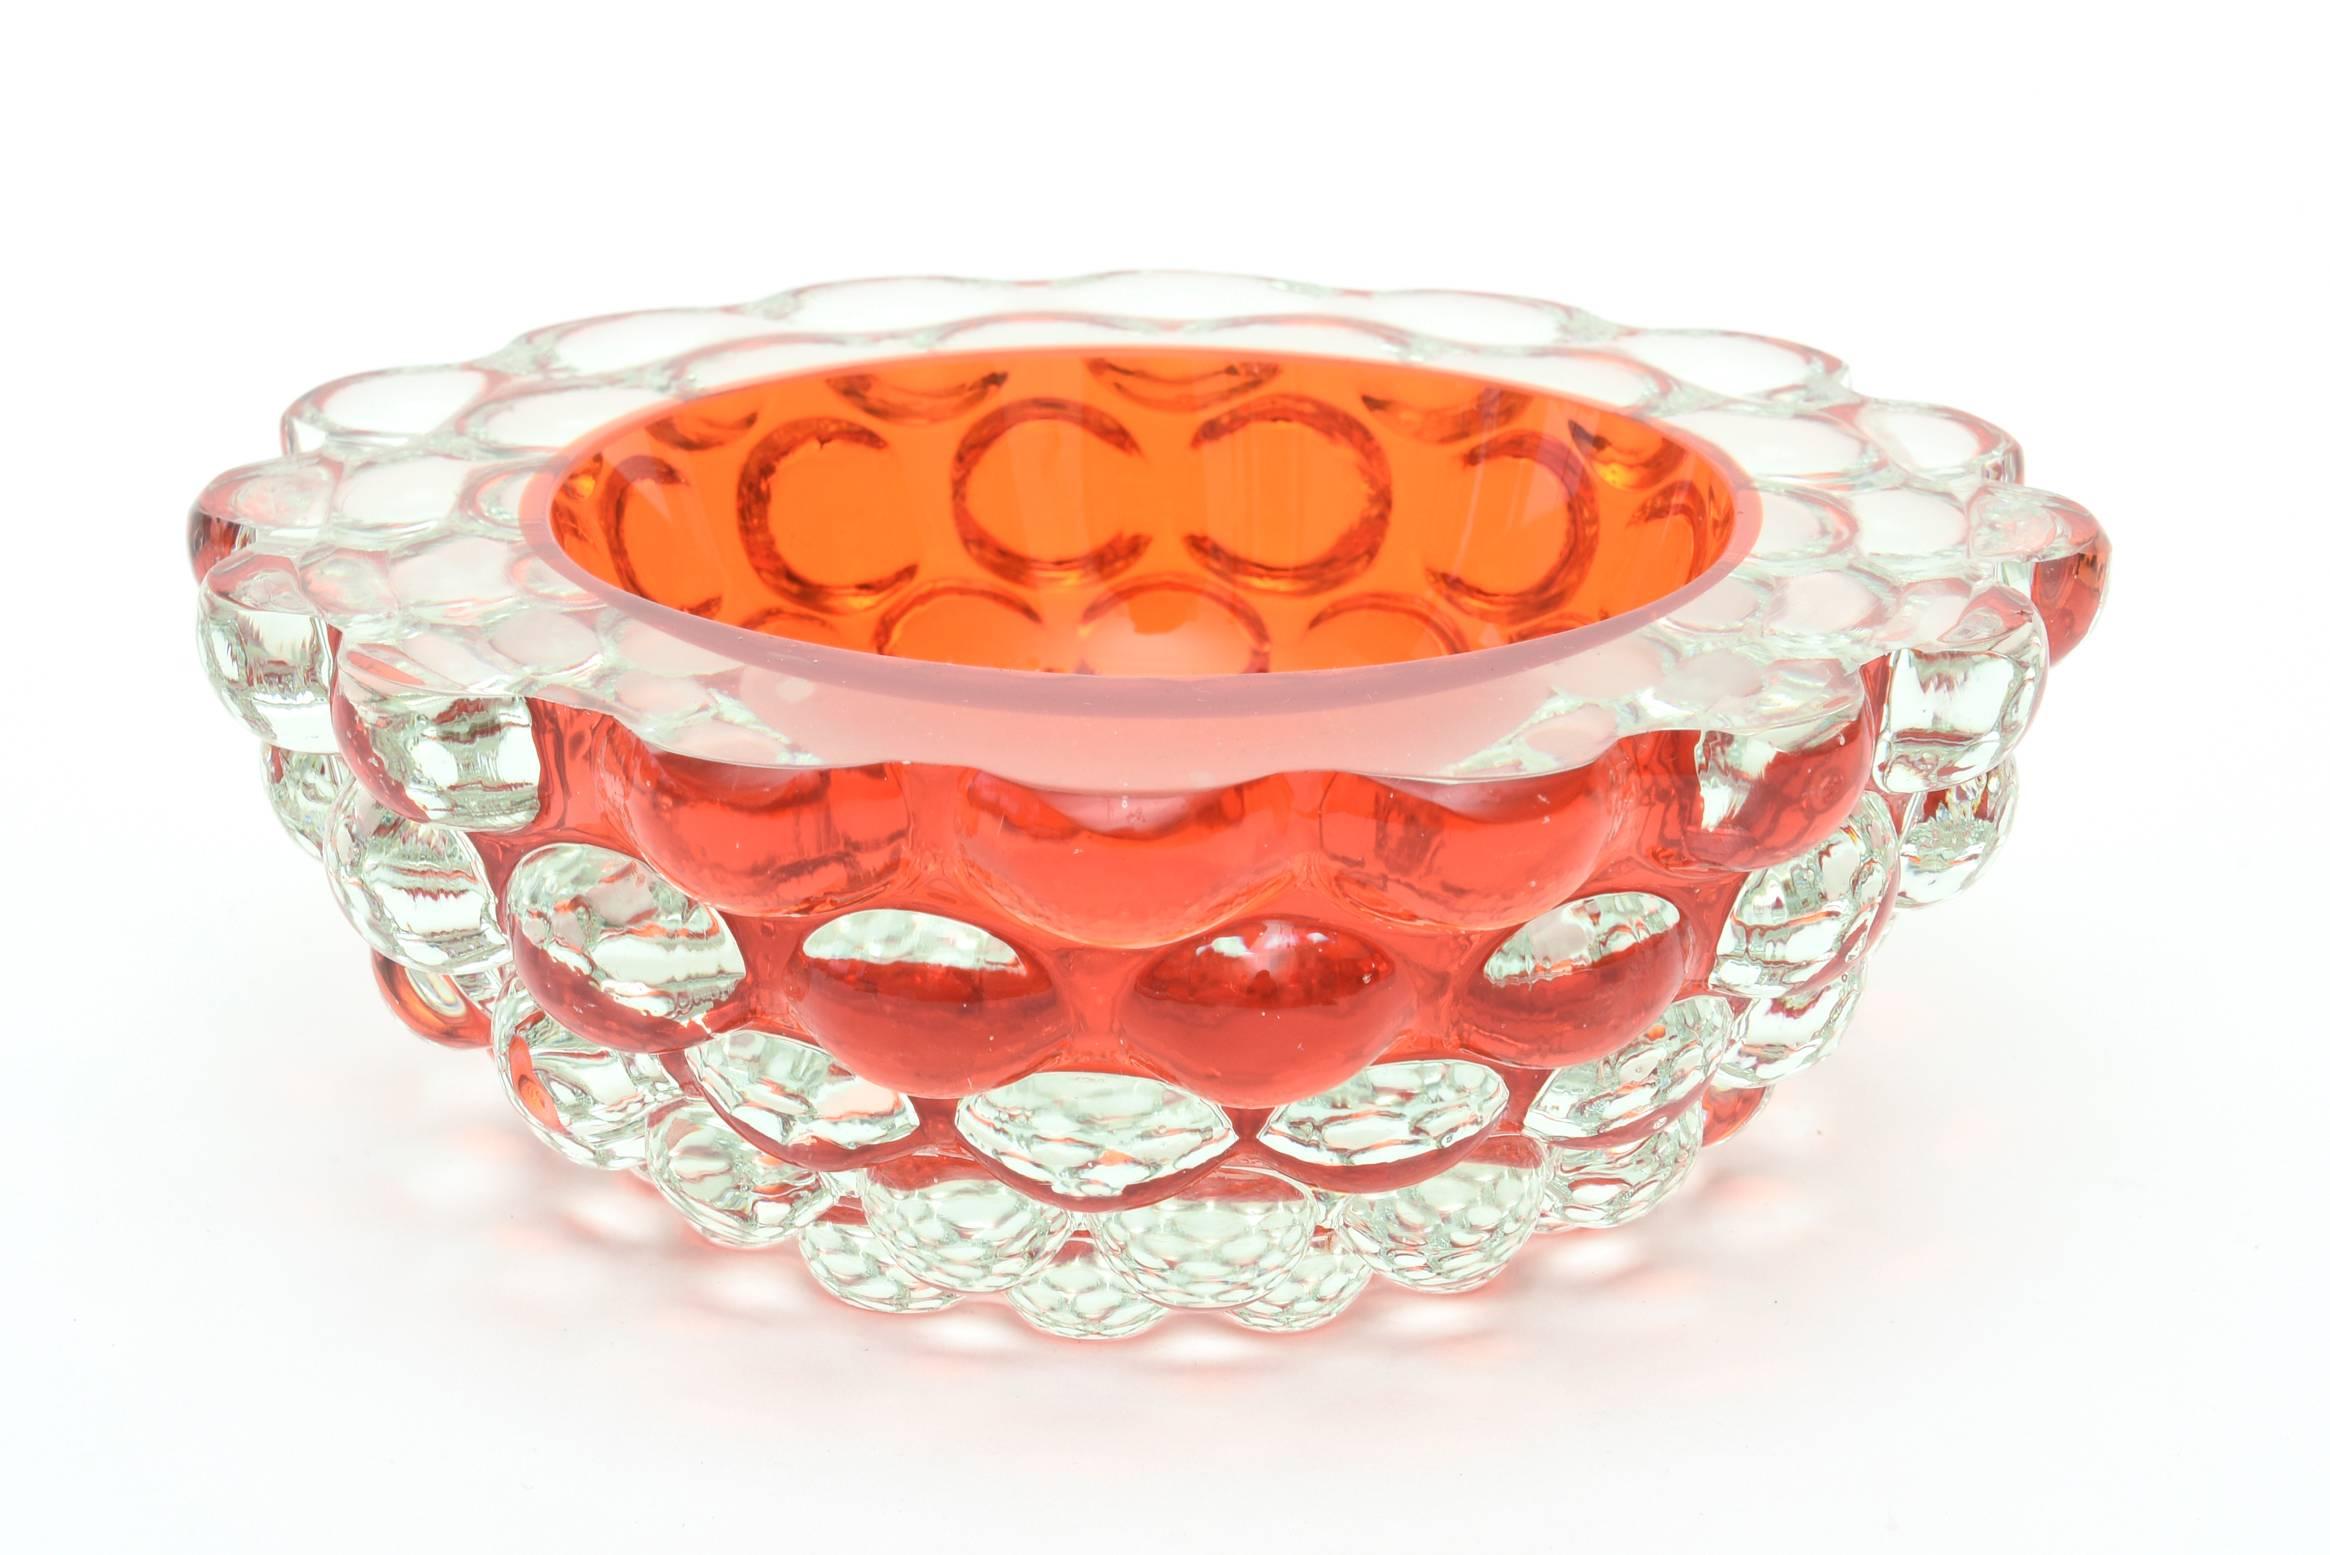 This luscious Italian Murano Sommerso bowl is by the company of G. Campanella and the interior color is Hermes orange in Sommerso layering.
It is almost like an orange bowl has been dropped in the center and you wish to lift it off; it creates an